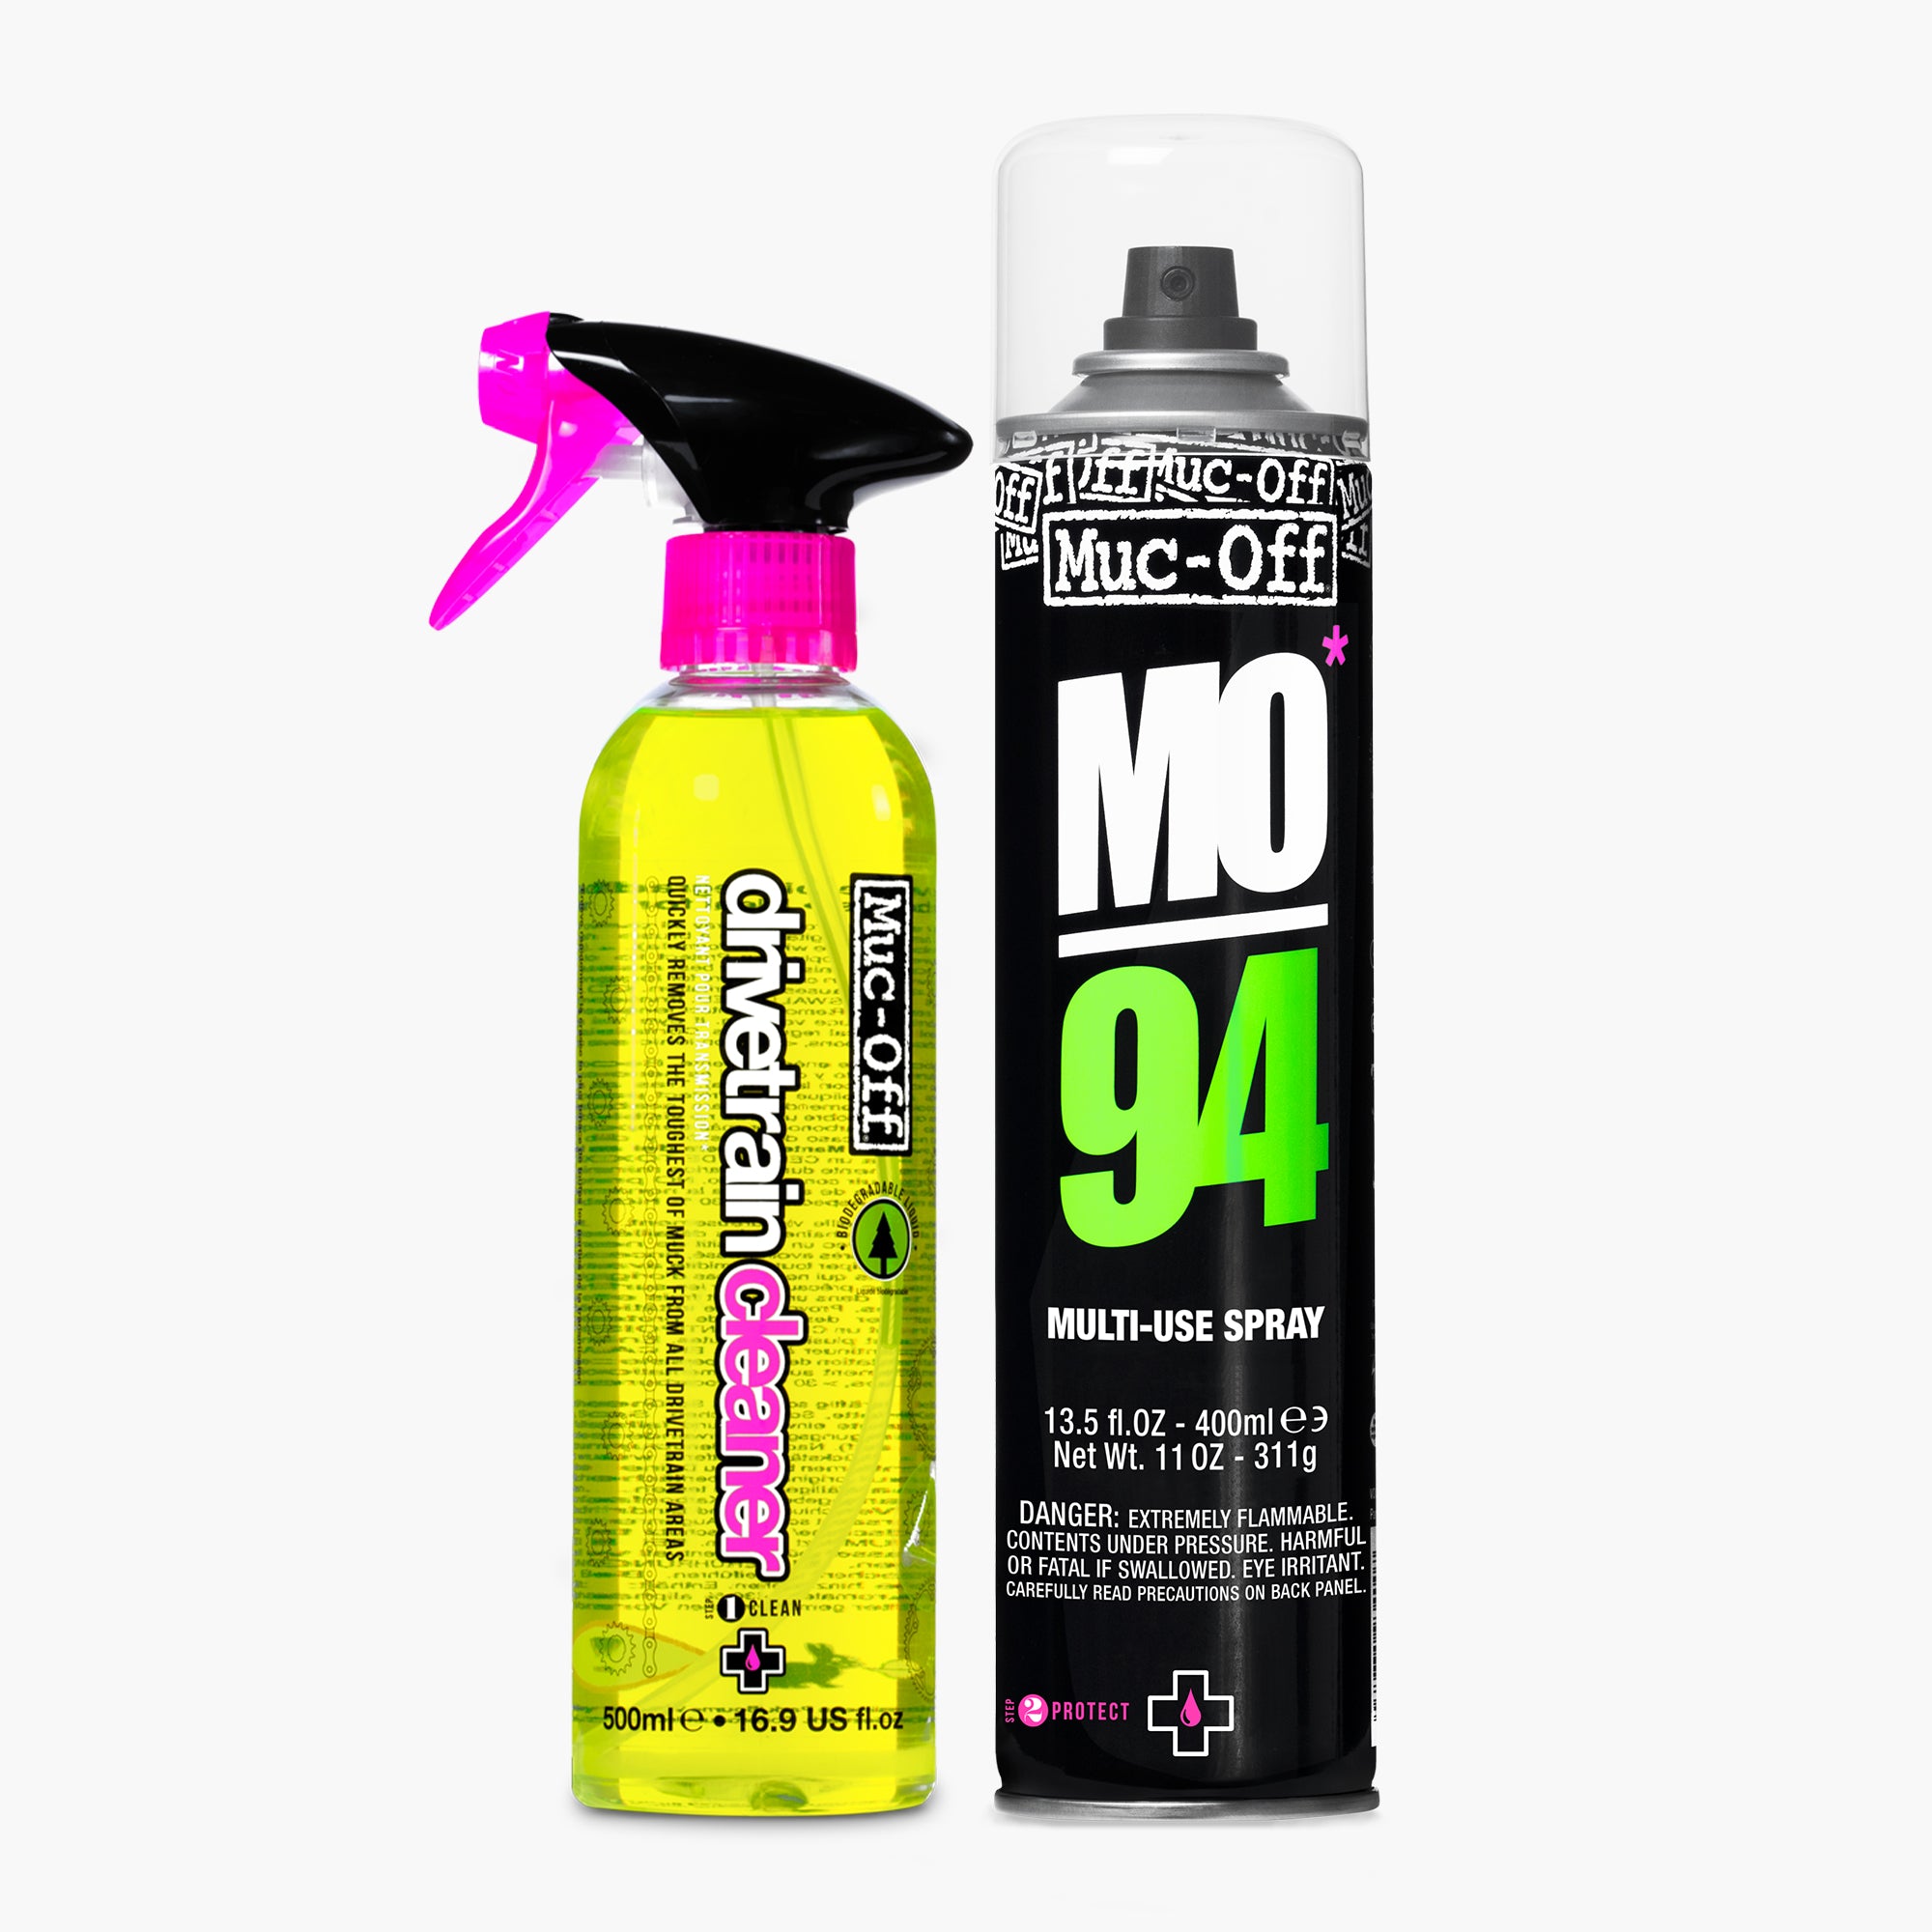  Muc Off Motorcycle Chain Cleaner, 16.9 fl oz - Chain Cleaner  and Degreaser Spray for Motorcycle Cleaning - Motorcycle Cleaner for On and  Off-Road : Automotive